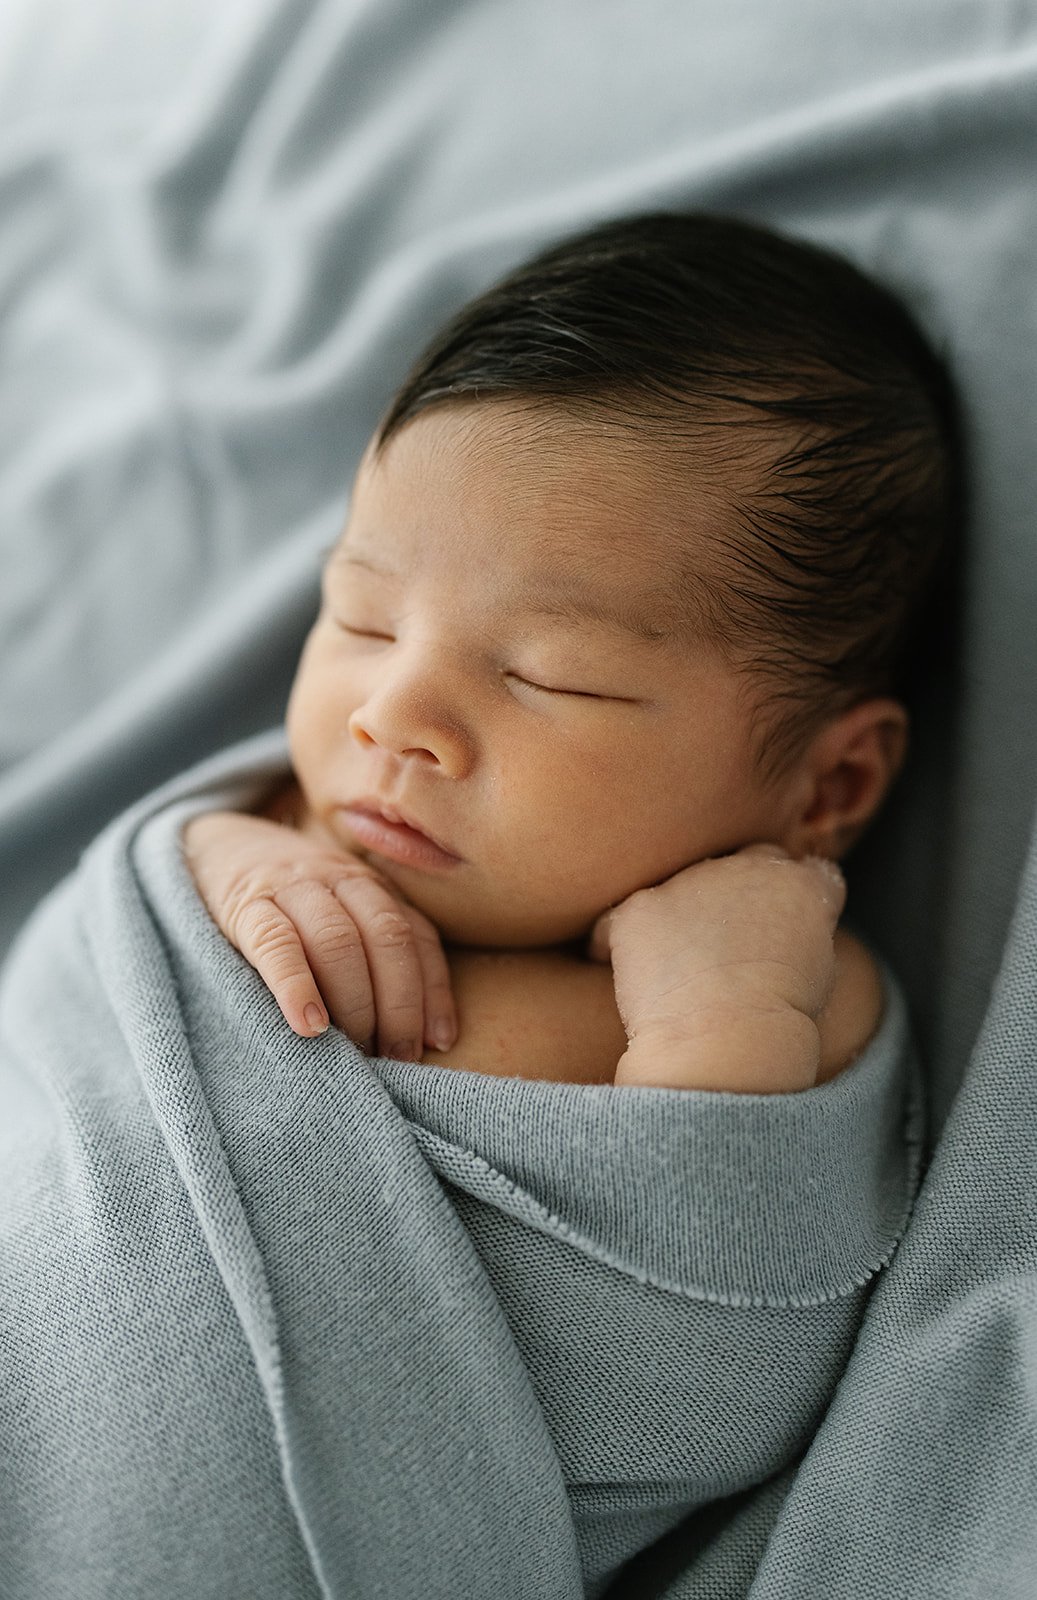 newborn baby boy photographed with dark thick hair and wrapped in a blue blanket